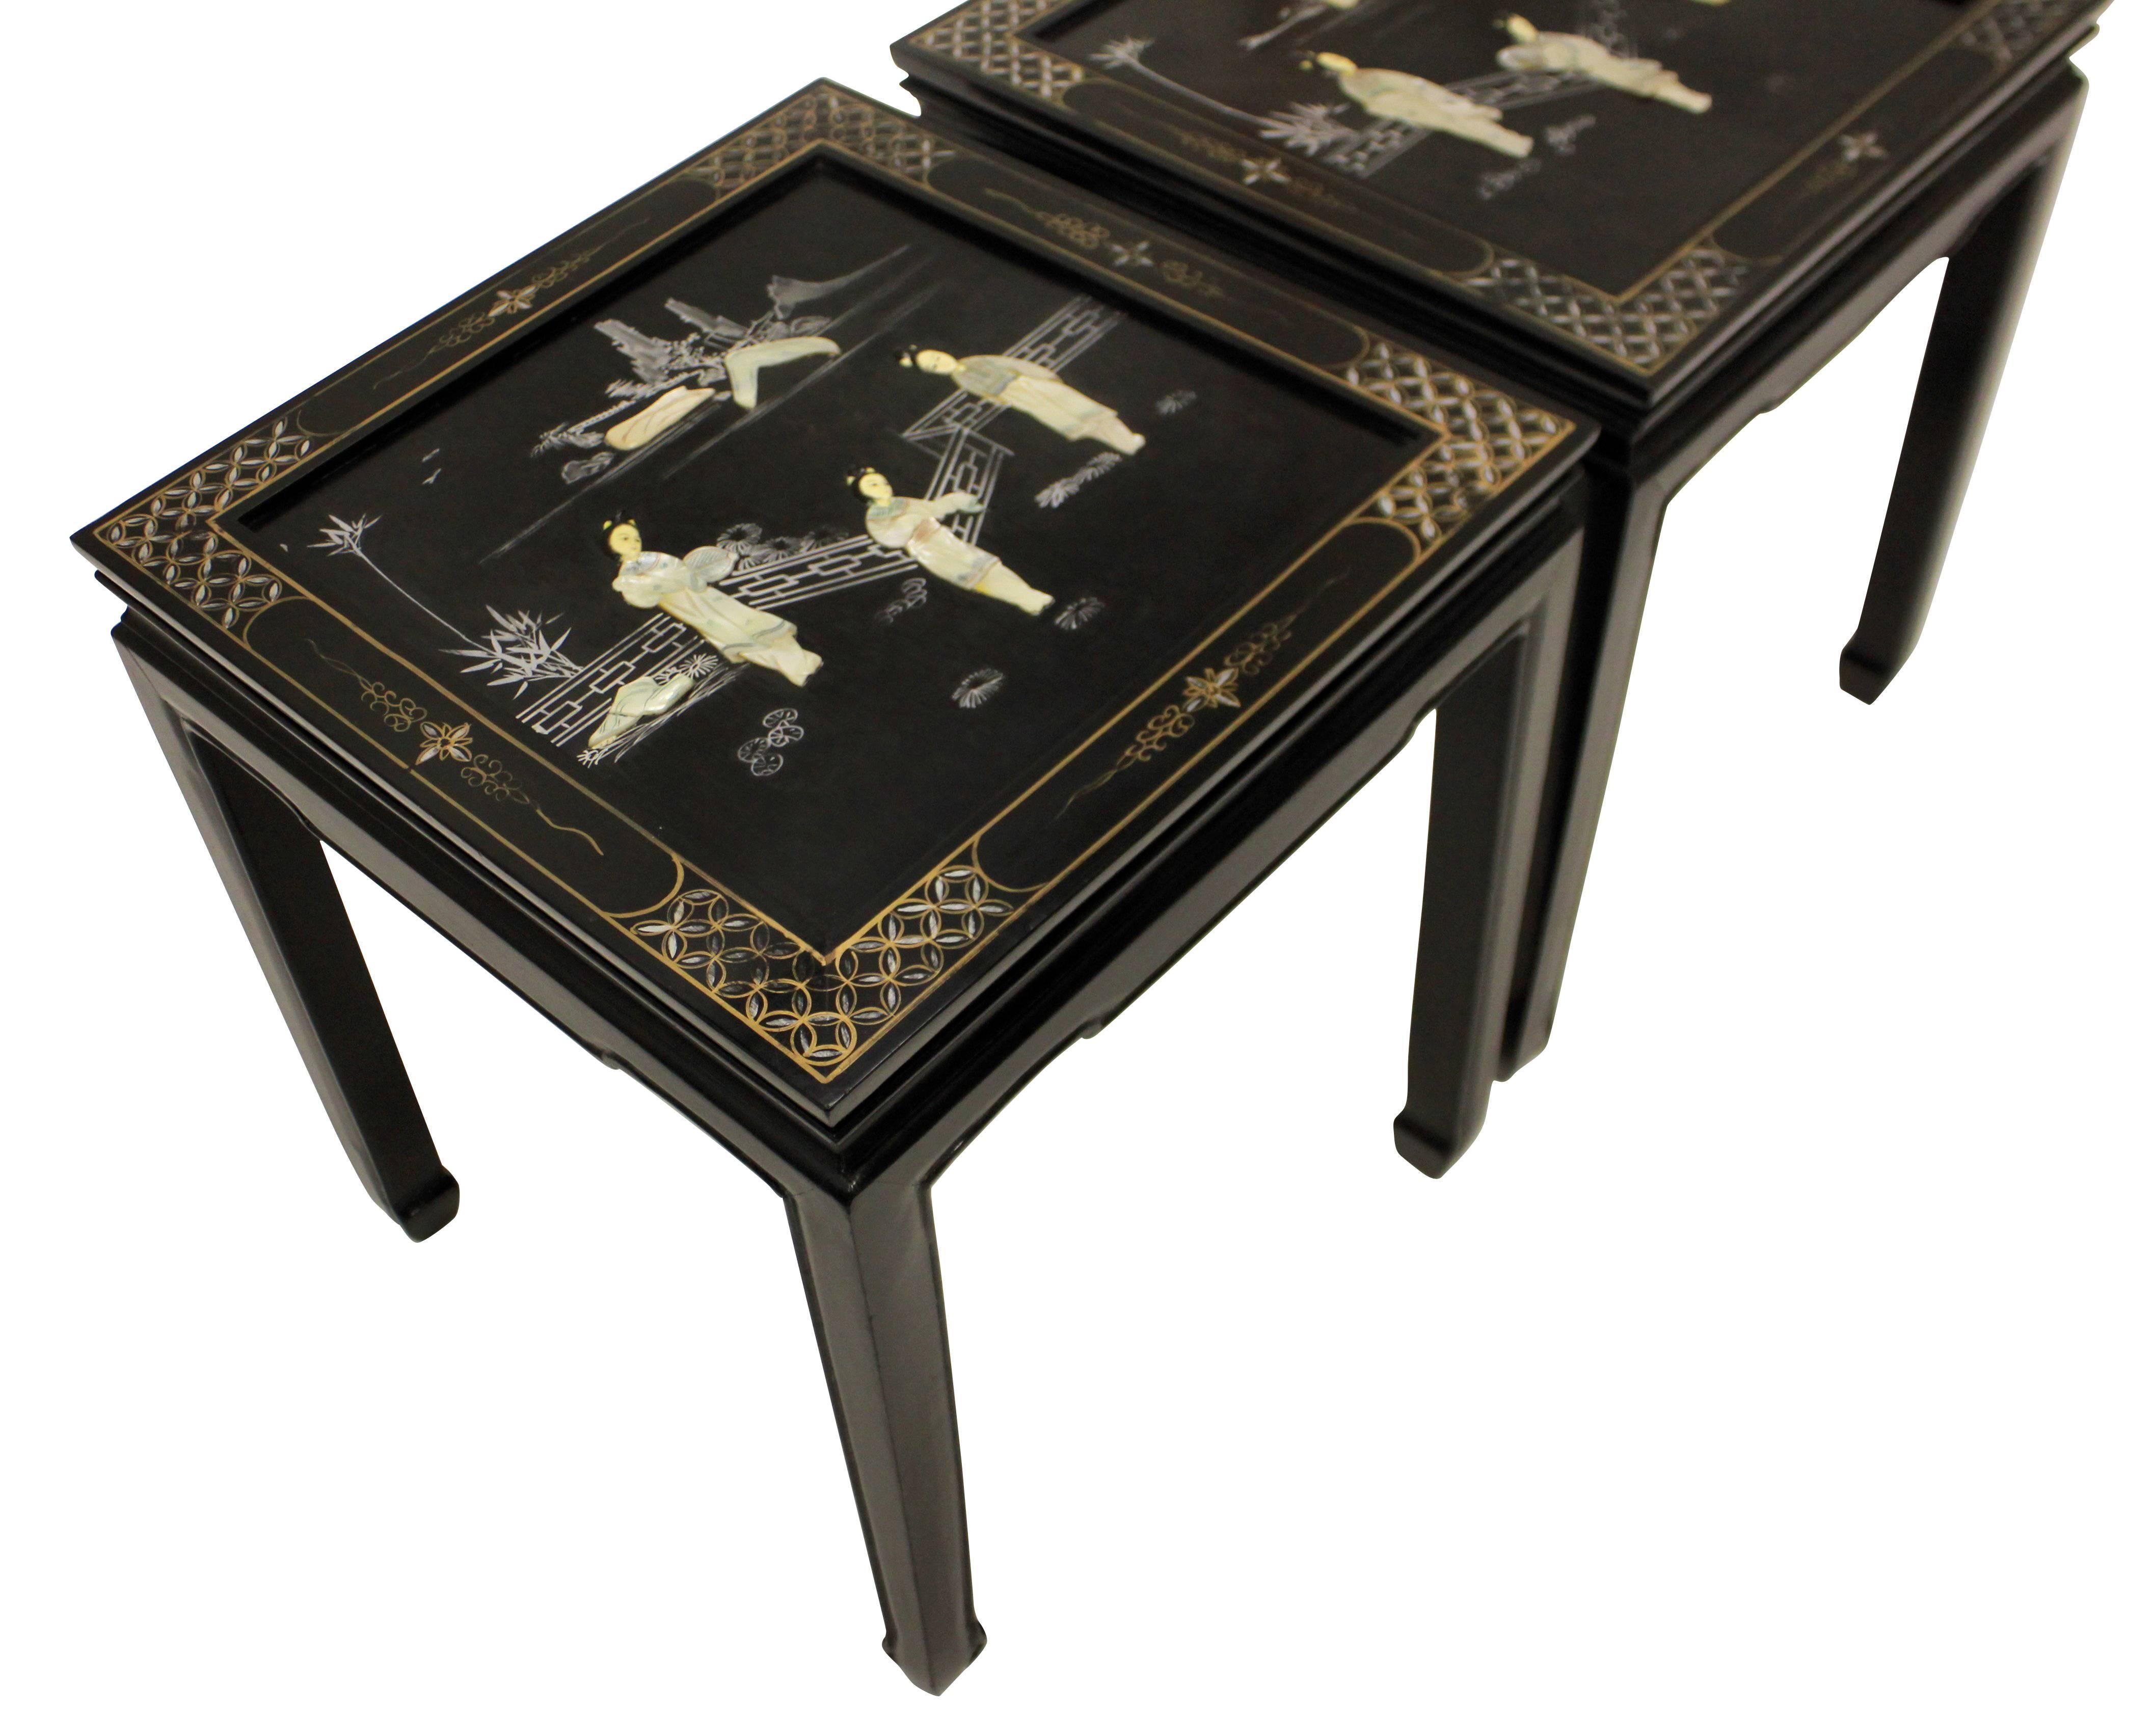 A pair of French Japanned side tables in black lacquer with ivory and mother-of-pearl detail.